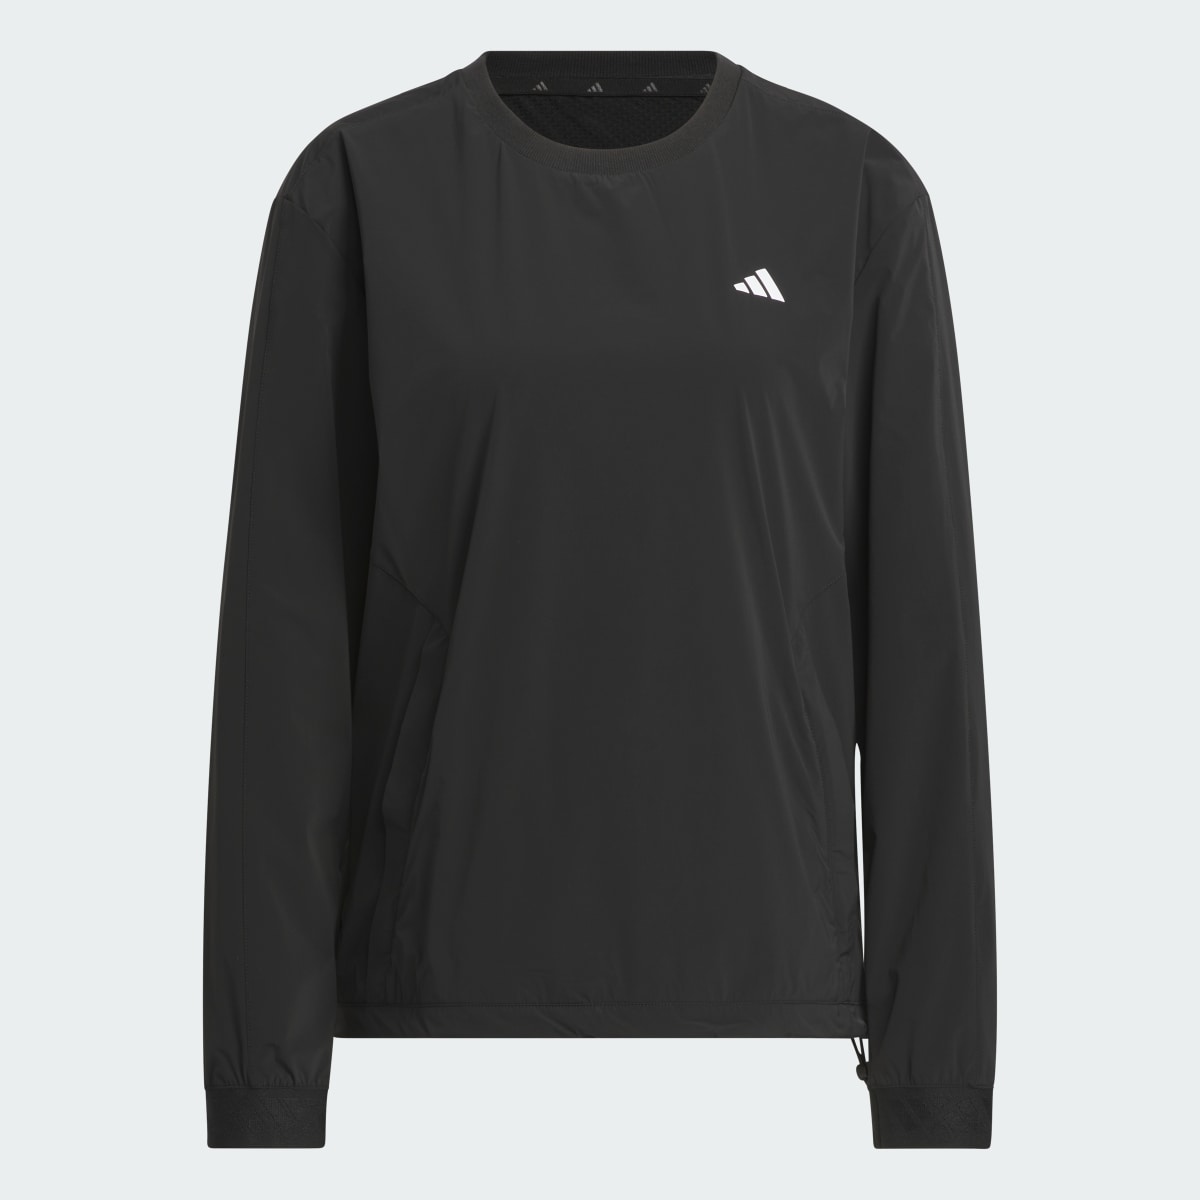 Adidas Ultimate365 Tour WIND.RDY Pullover Sweatshirt. 5